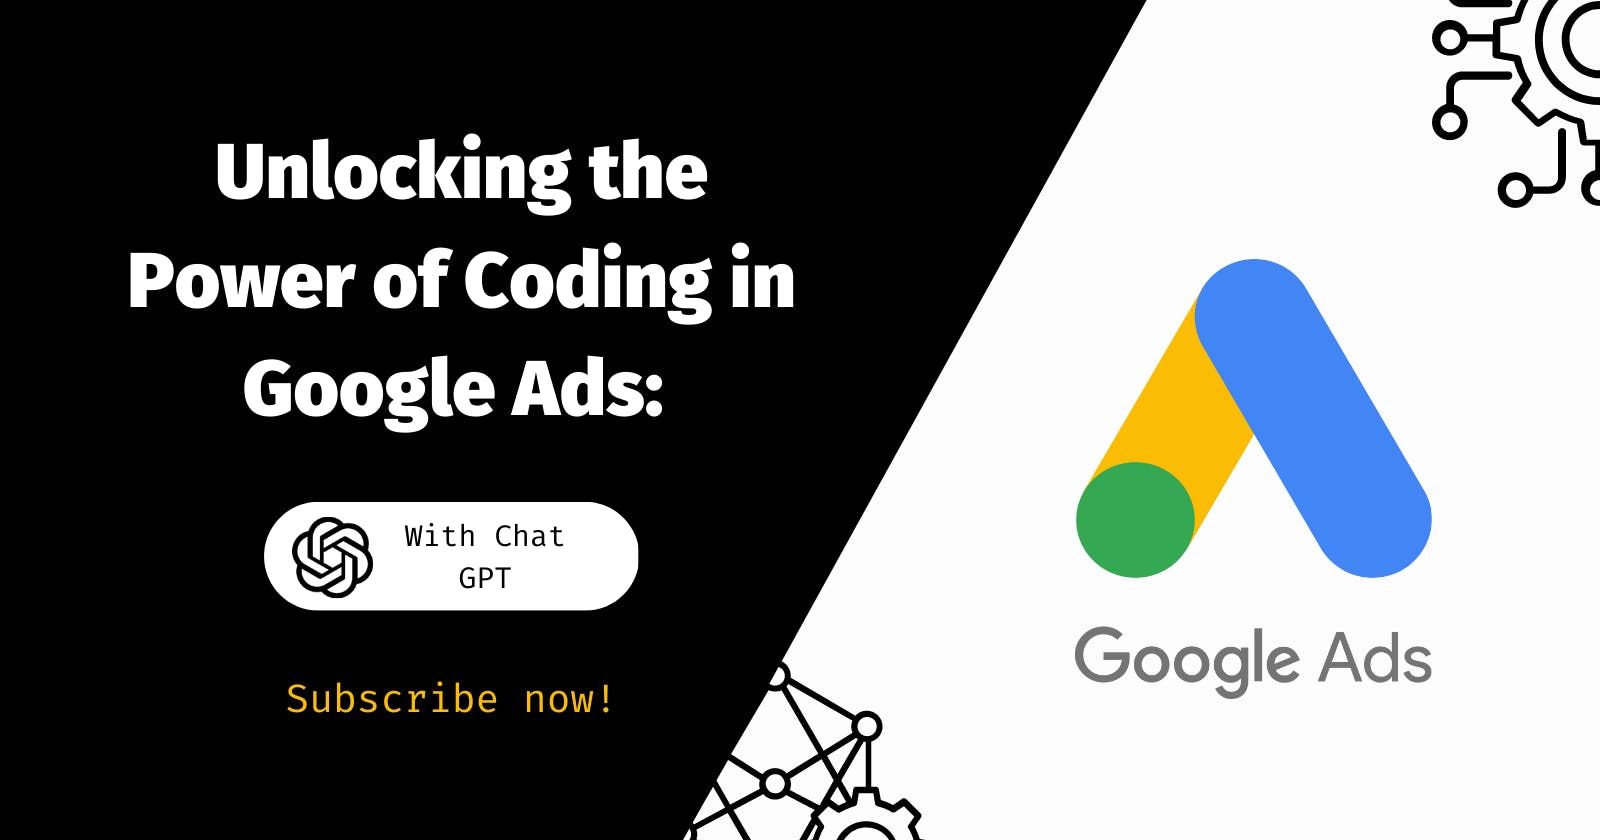 Coding and Google Ads: My New Focus